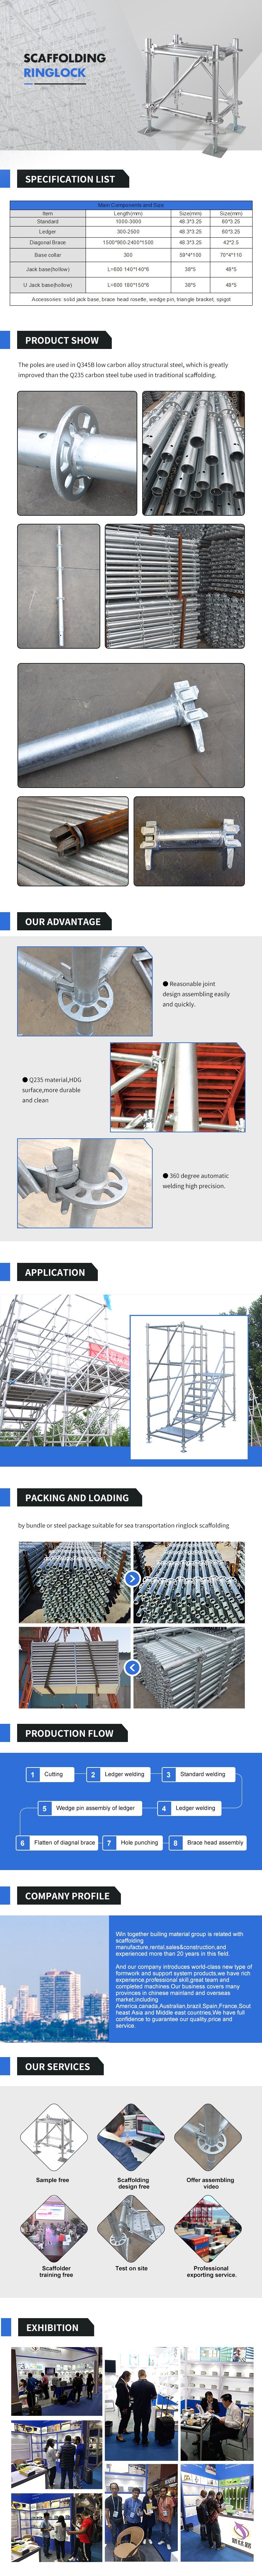 Low Prices High Quality 4-in Casters Steel Mini Scaffolding